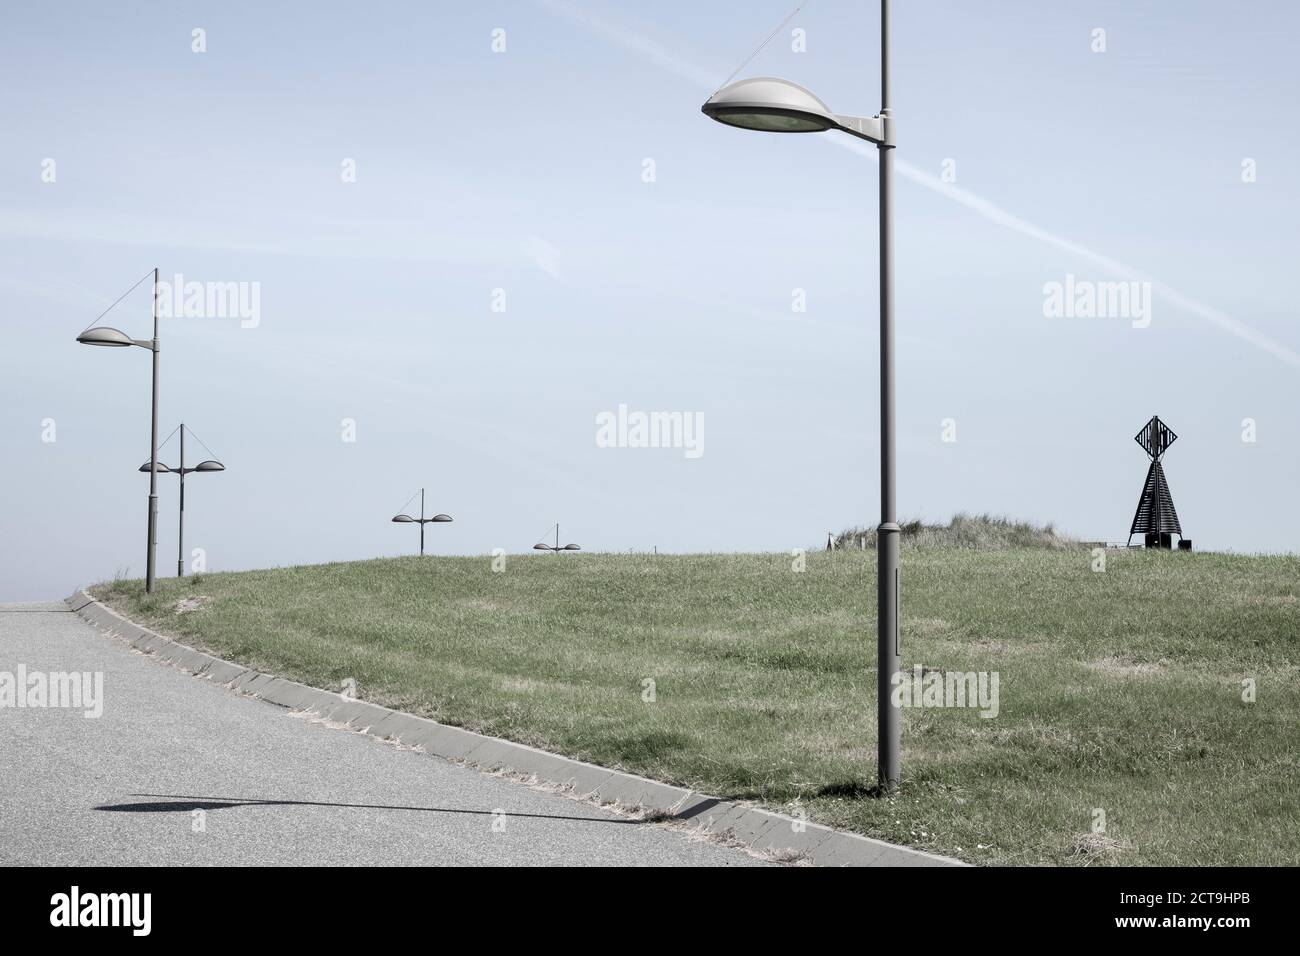 Germany, Lower Saxony, Baltrum, path with streetlamps Stock Photo